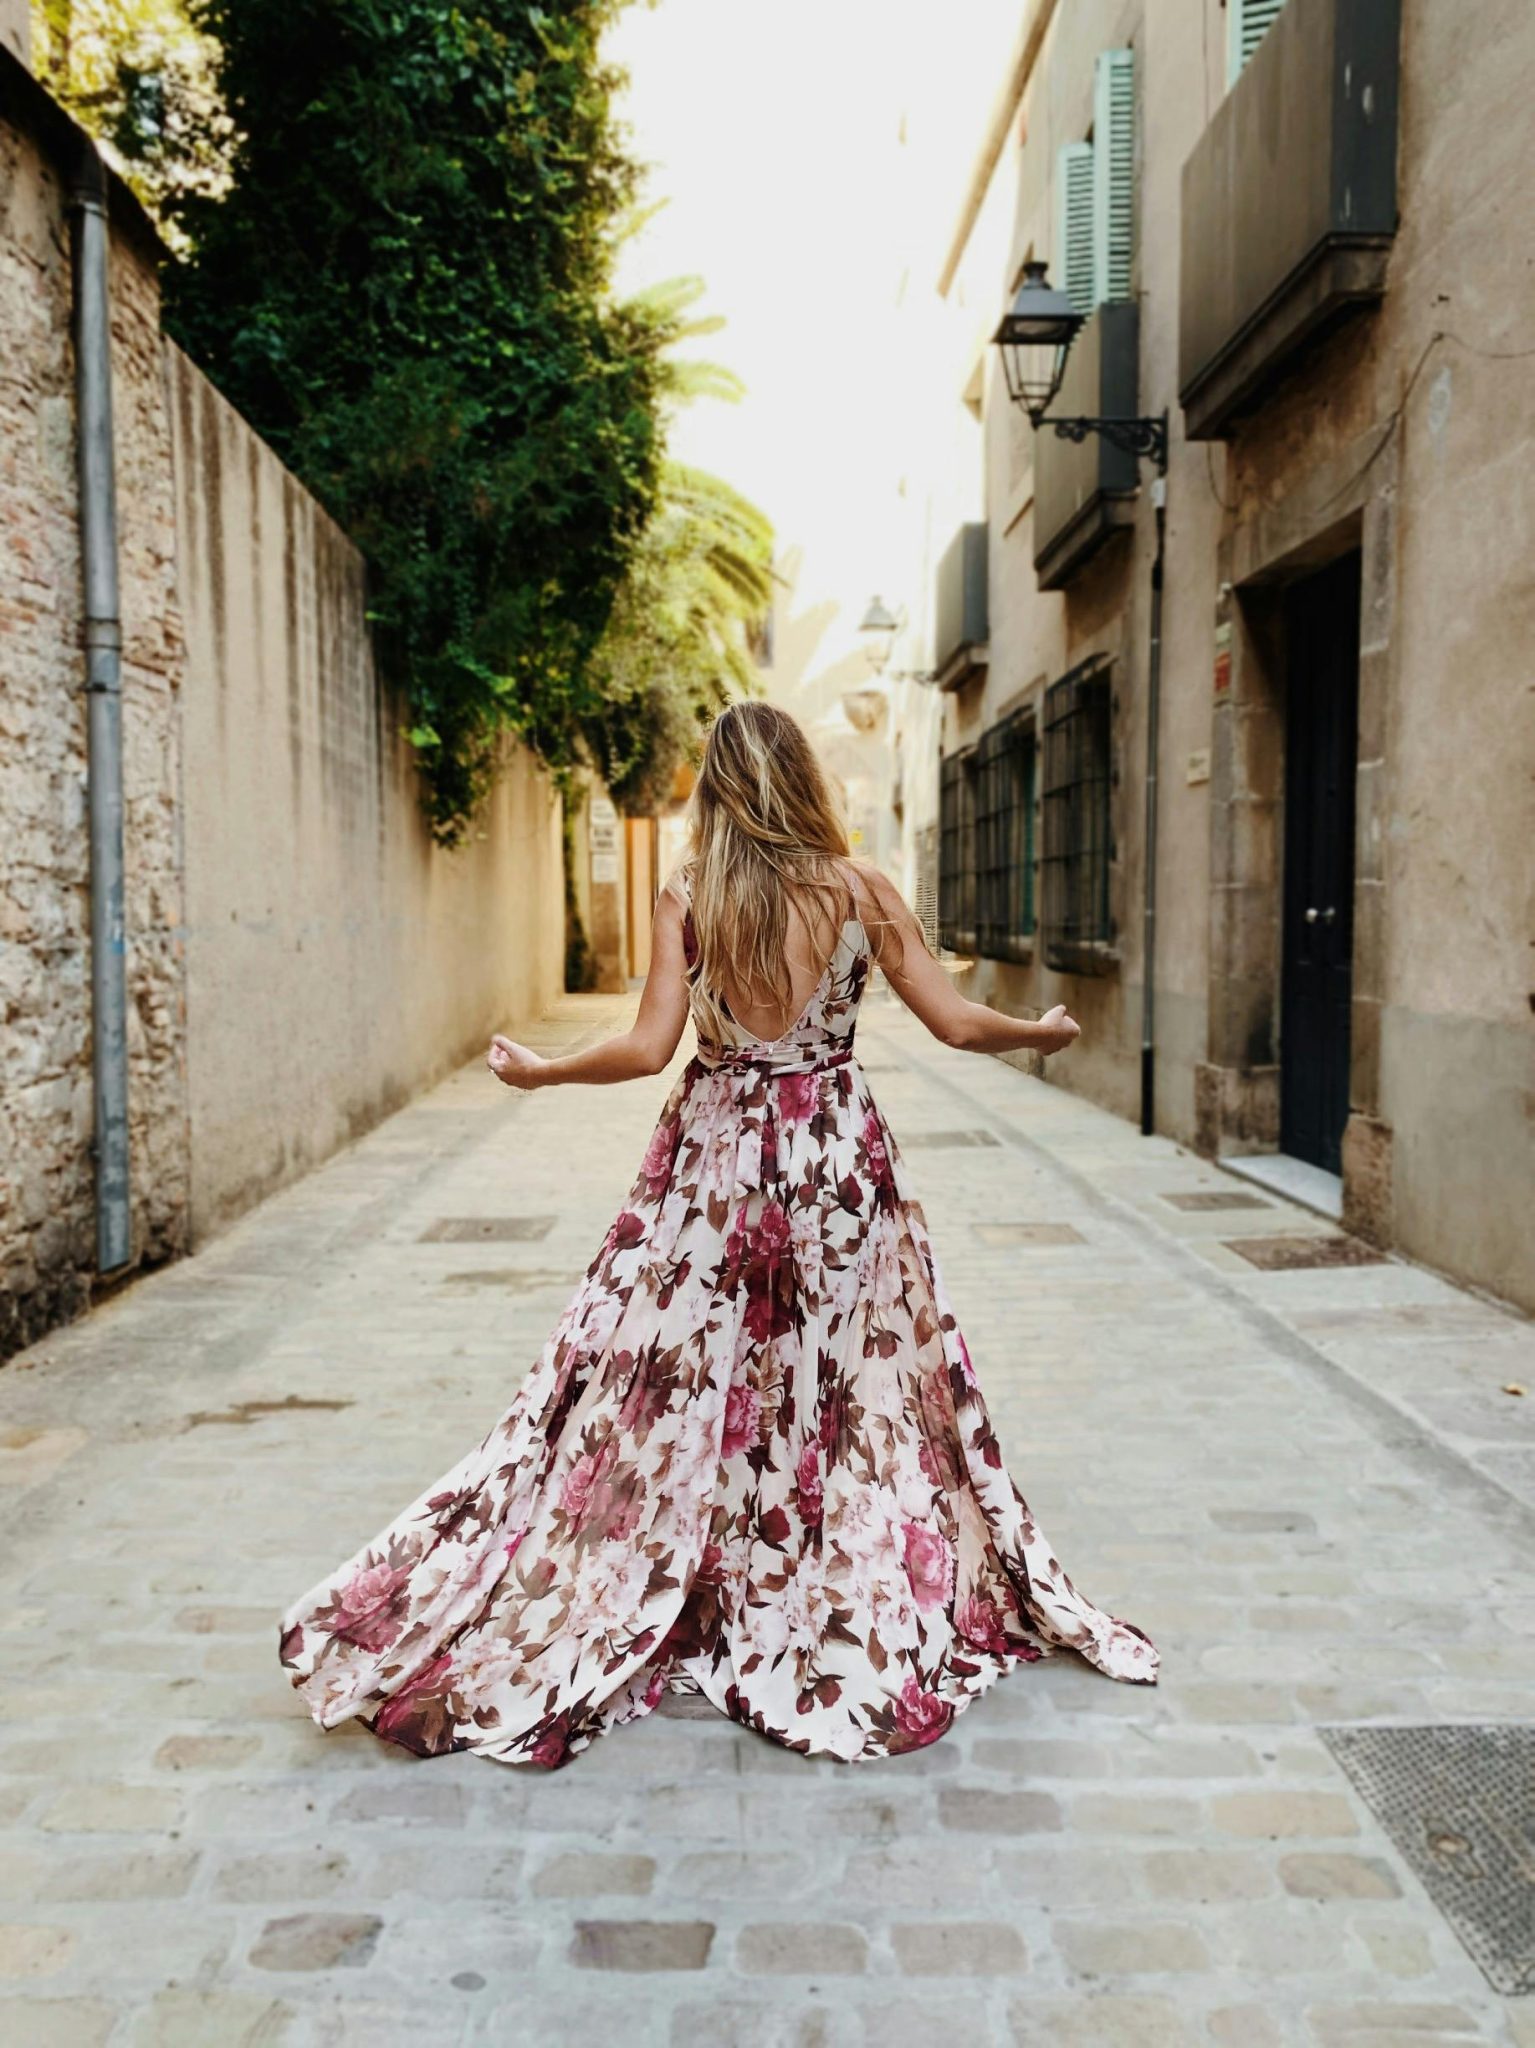 Woman wearing white and pink floral bridesmaid dress standing on alley